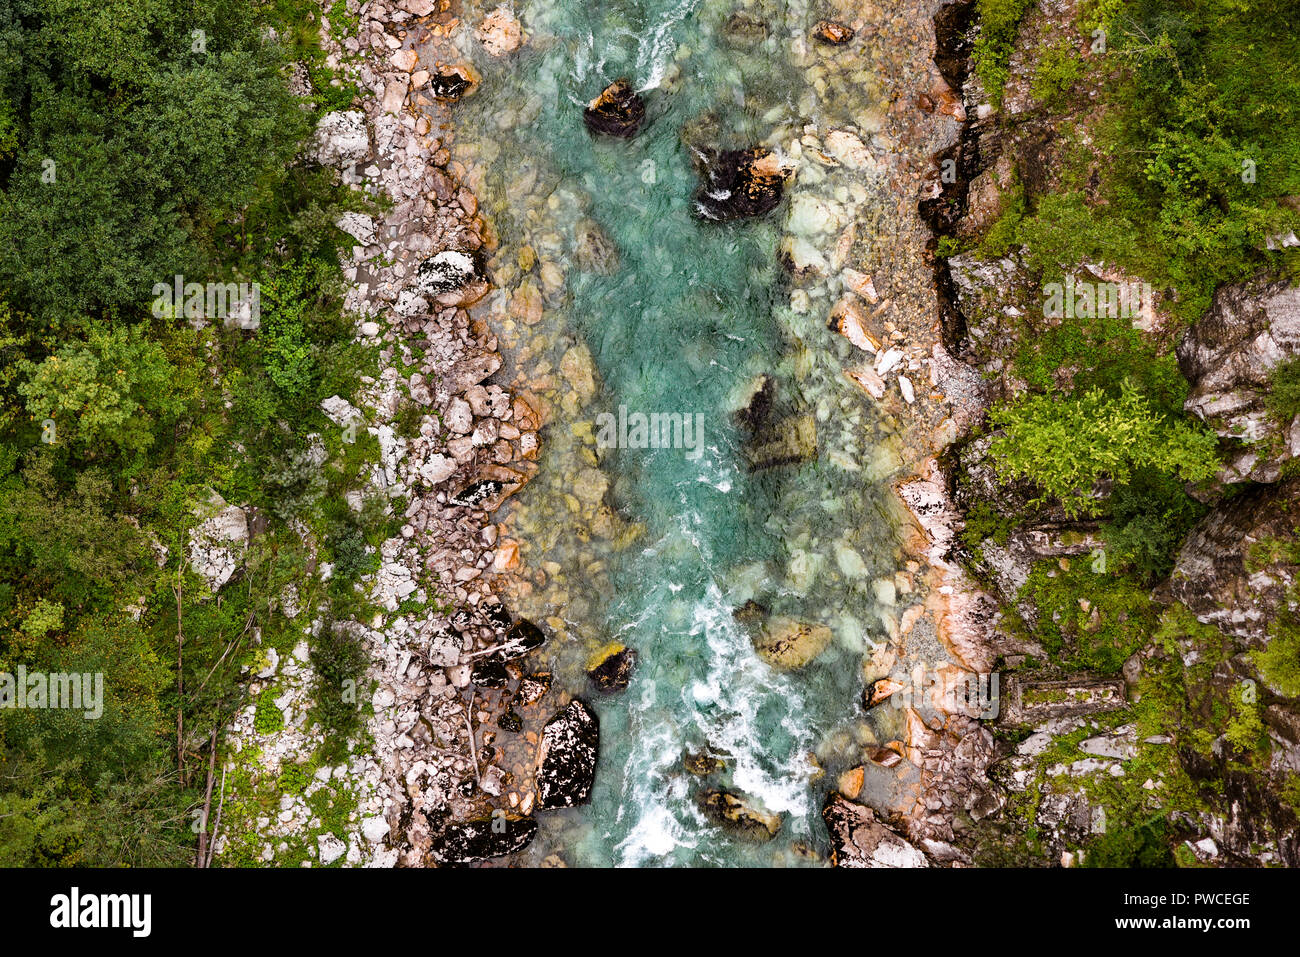 The tare river canyon seen from above in Montenegro. Stock Photo